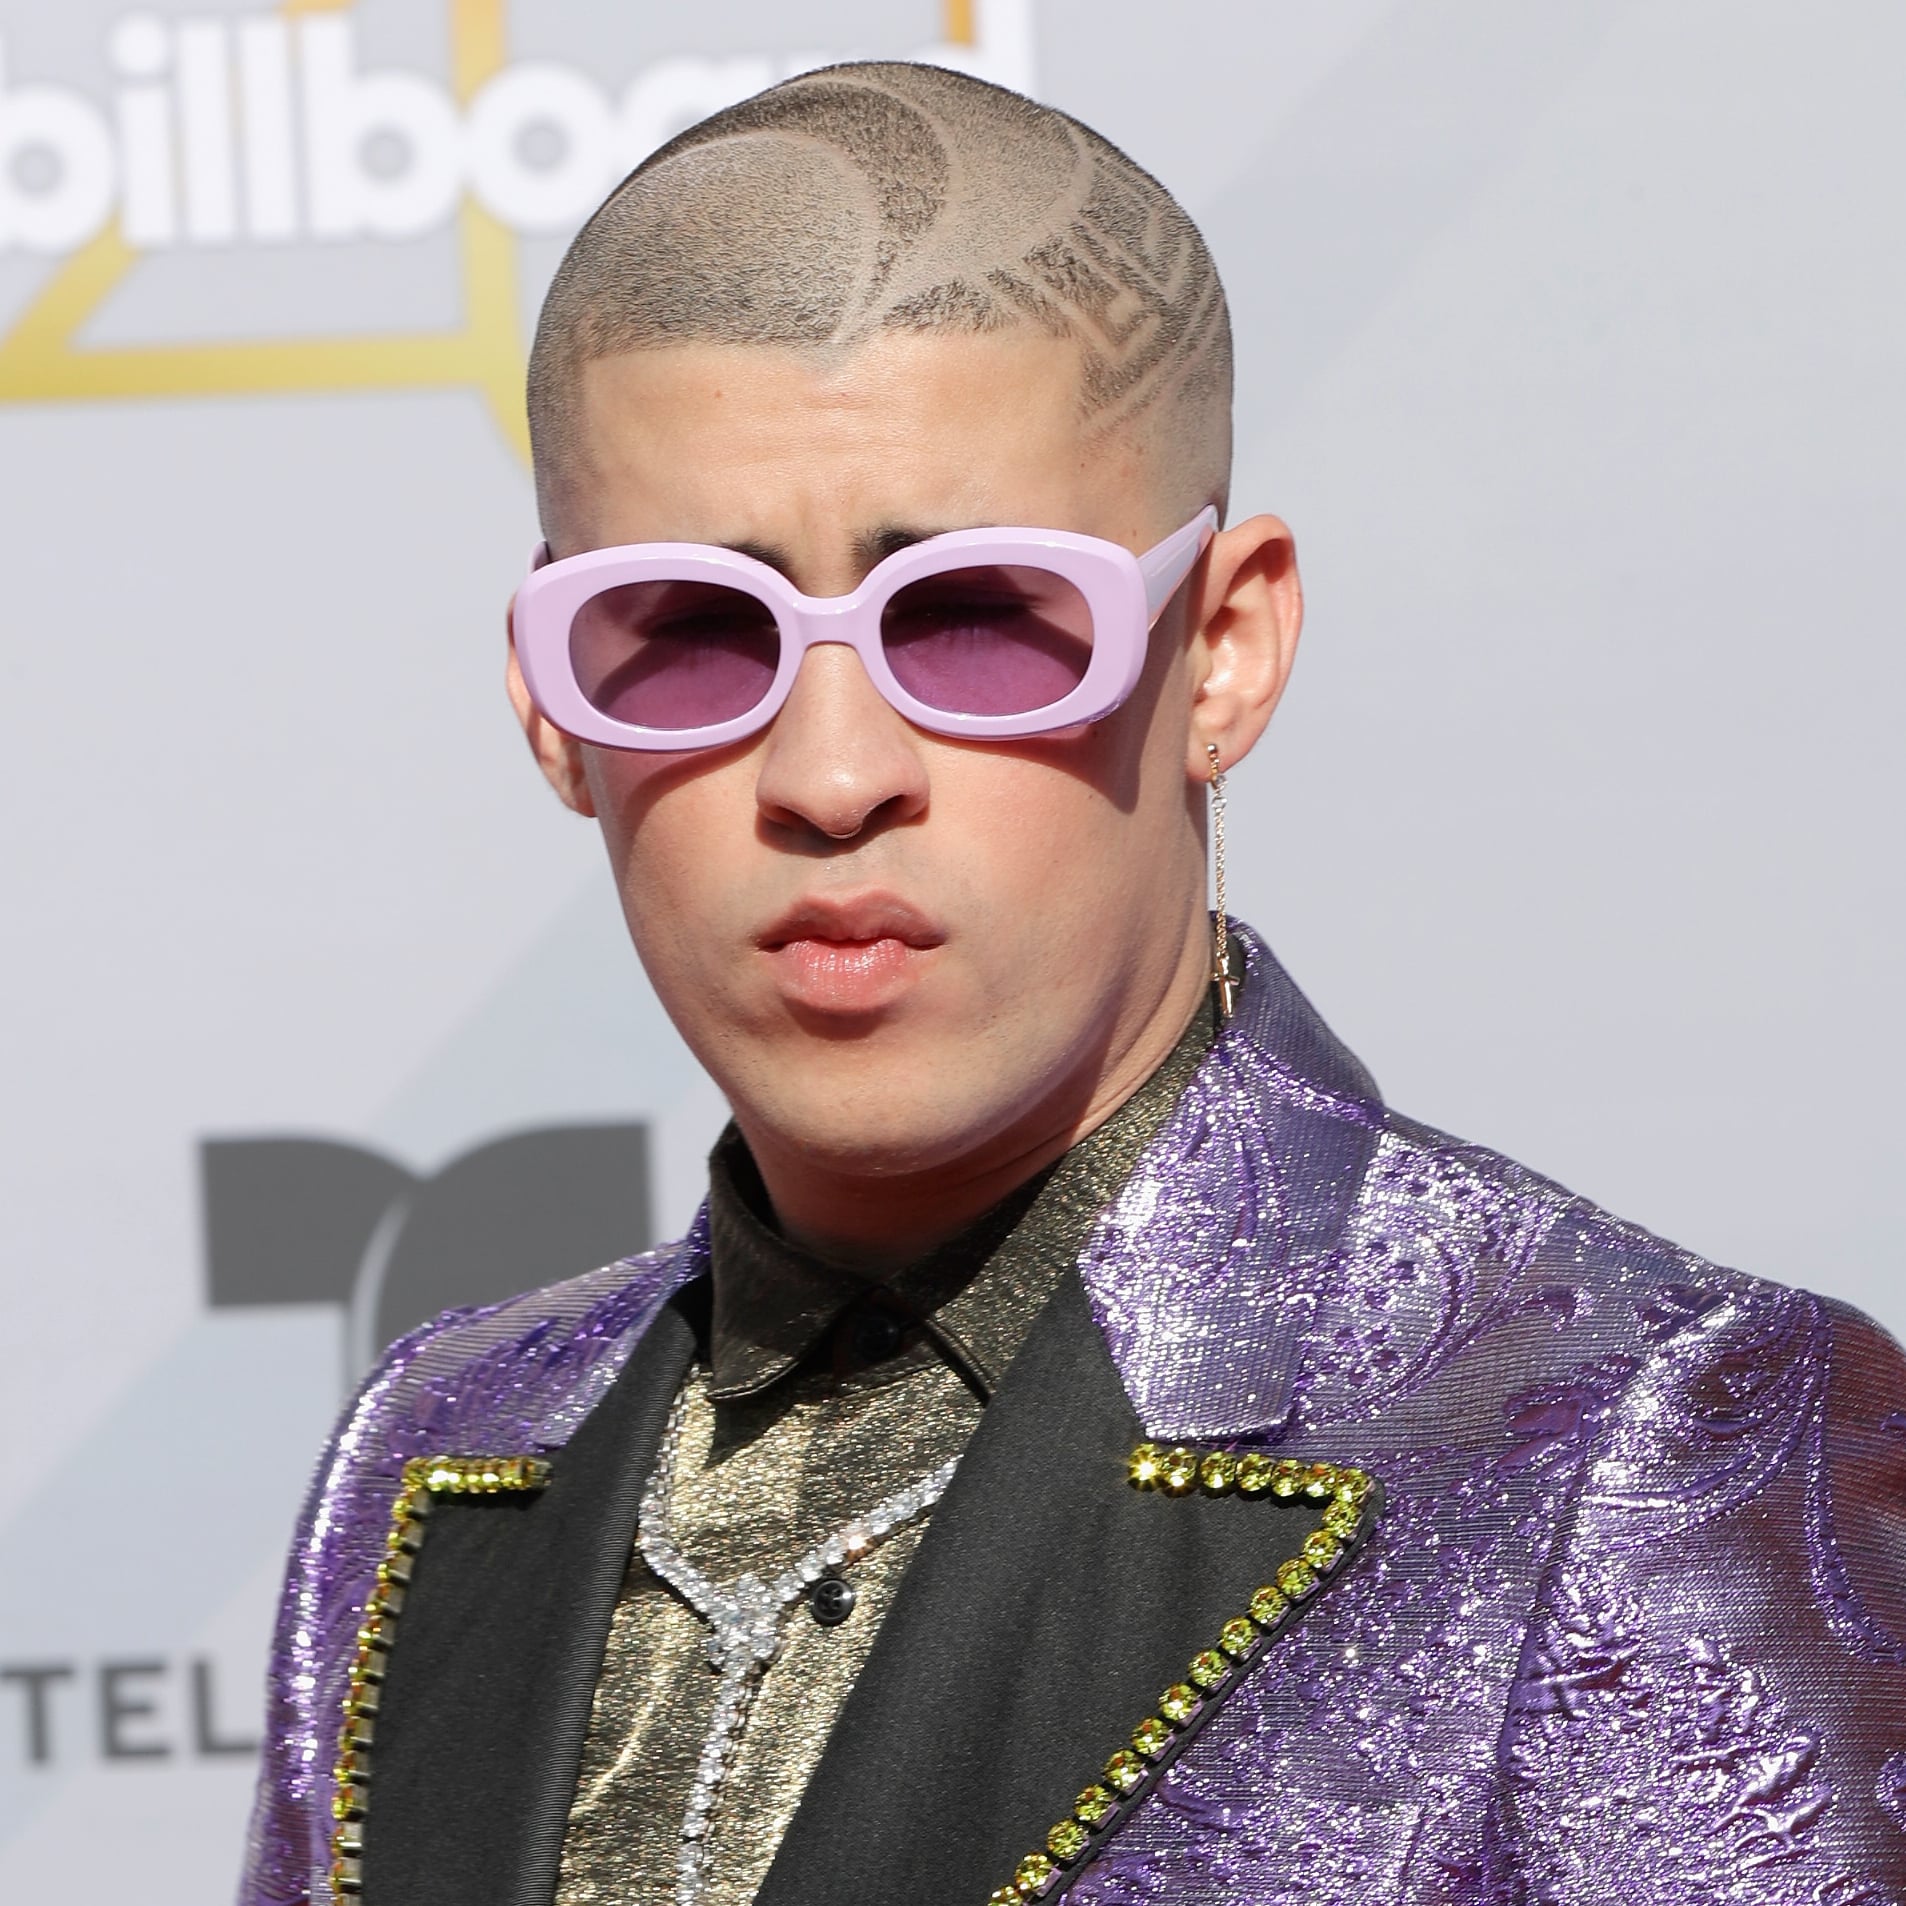 Who is Bad Bunny Take a Look at Bad Bunny Tattoos